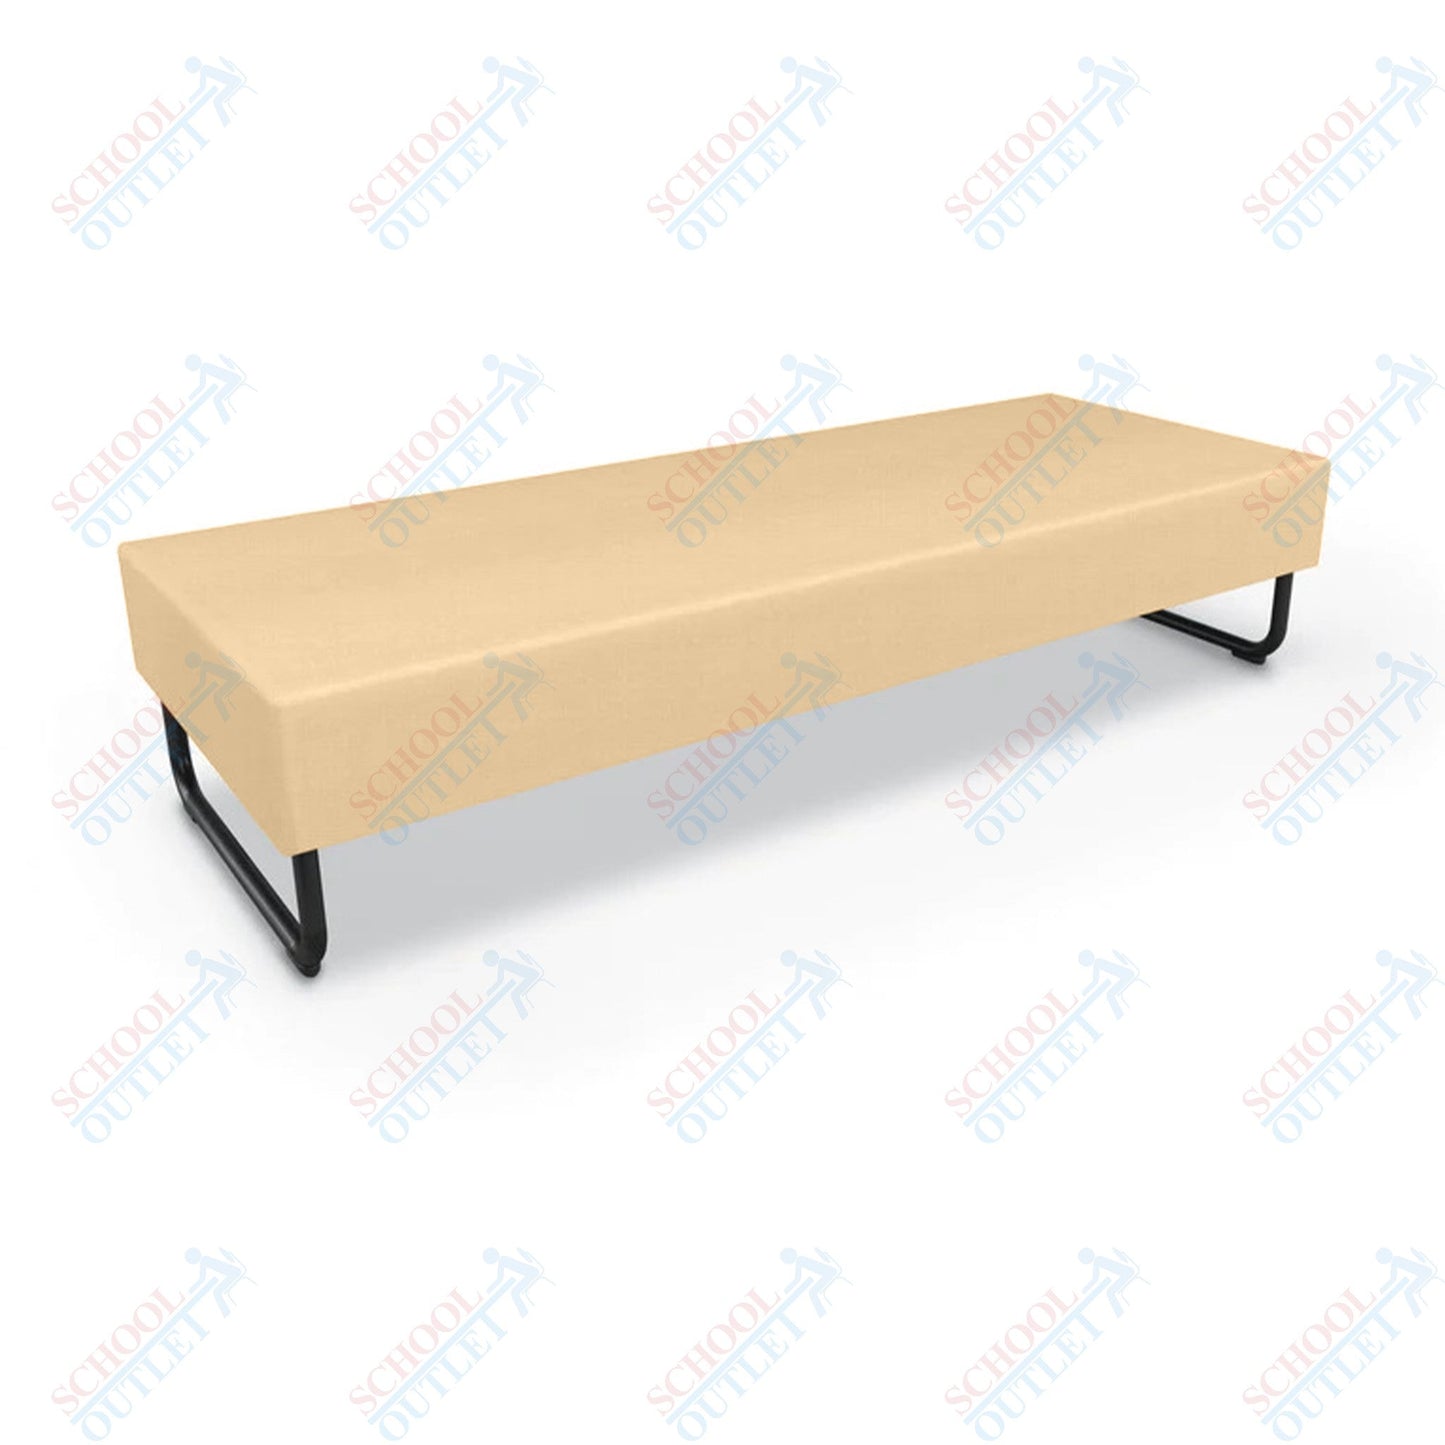 Mooreco Akt Soft Seating Lounge Sofa Bench - Grade 02 Fabric and Powder Coated Sled Legs - SchoolOutlet